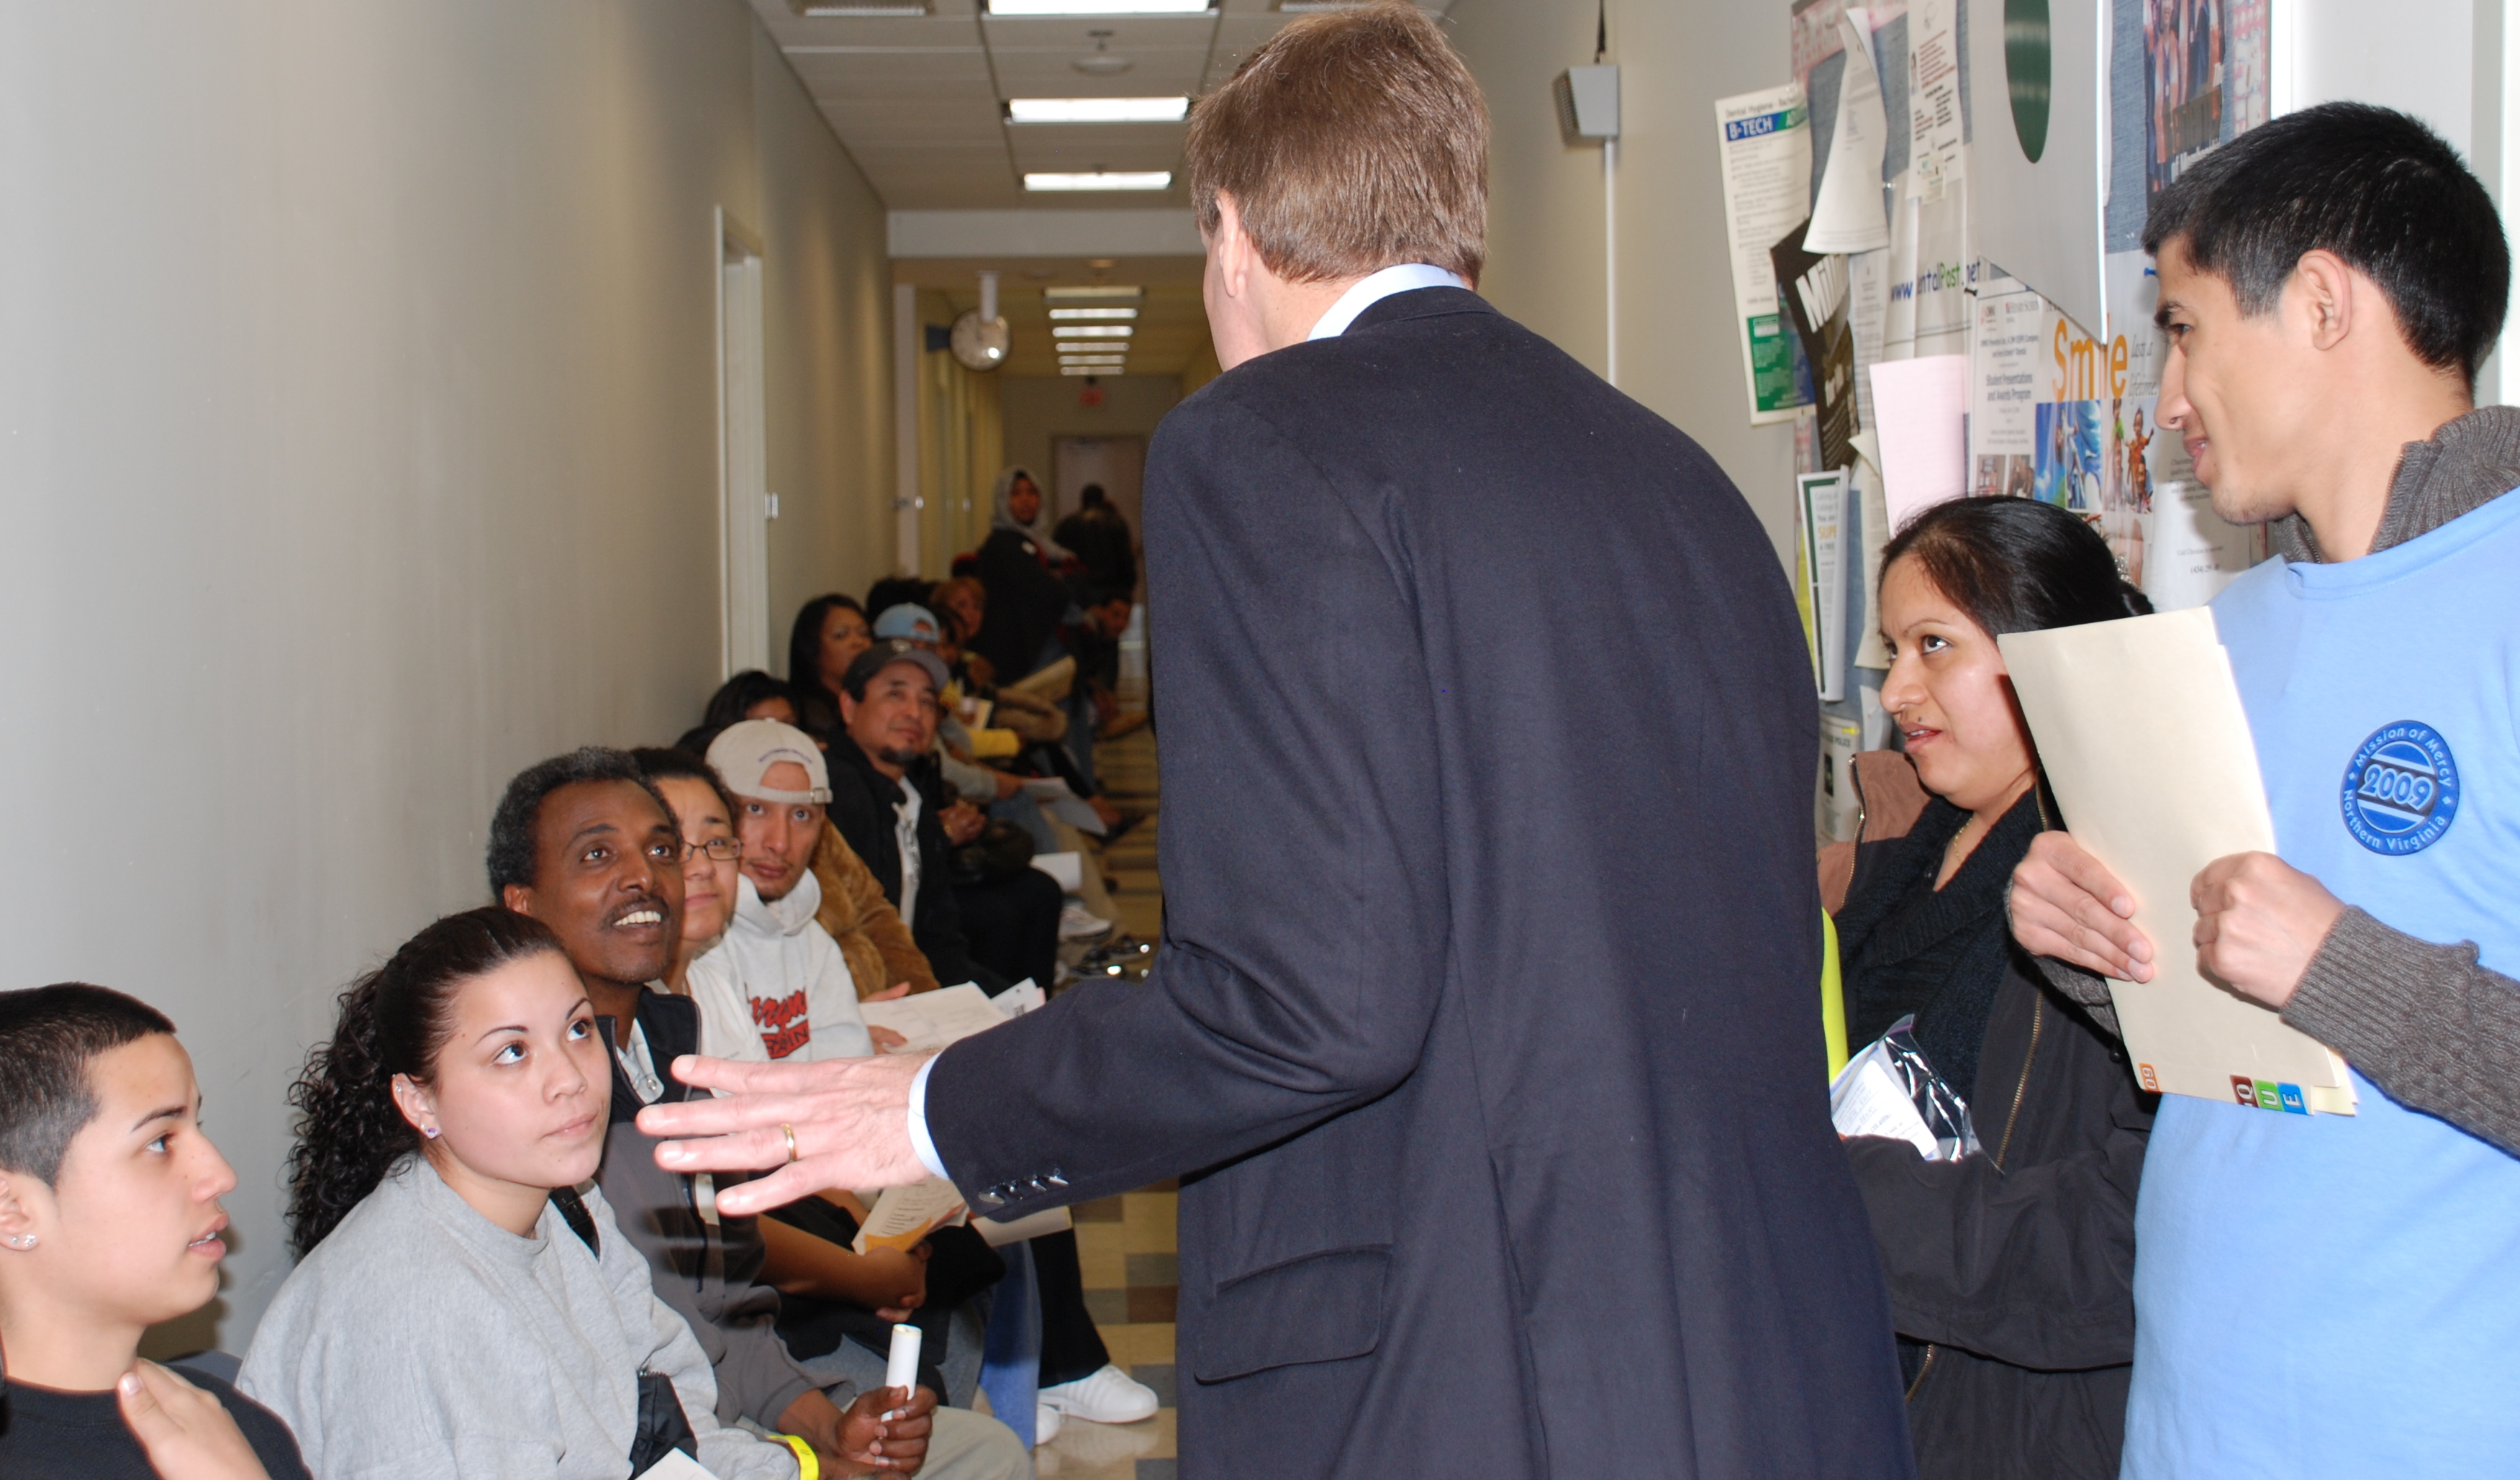 Senator Warner greets patients at the Mission of Mercy's free dental clinic at NVCC's Fairfax Campus